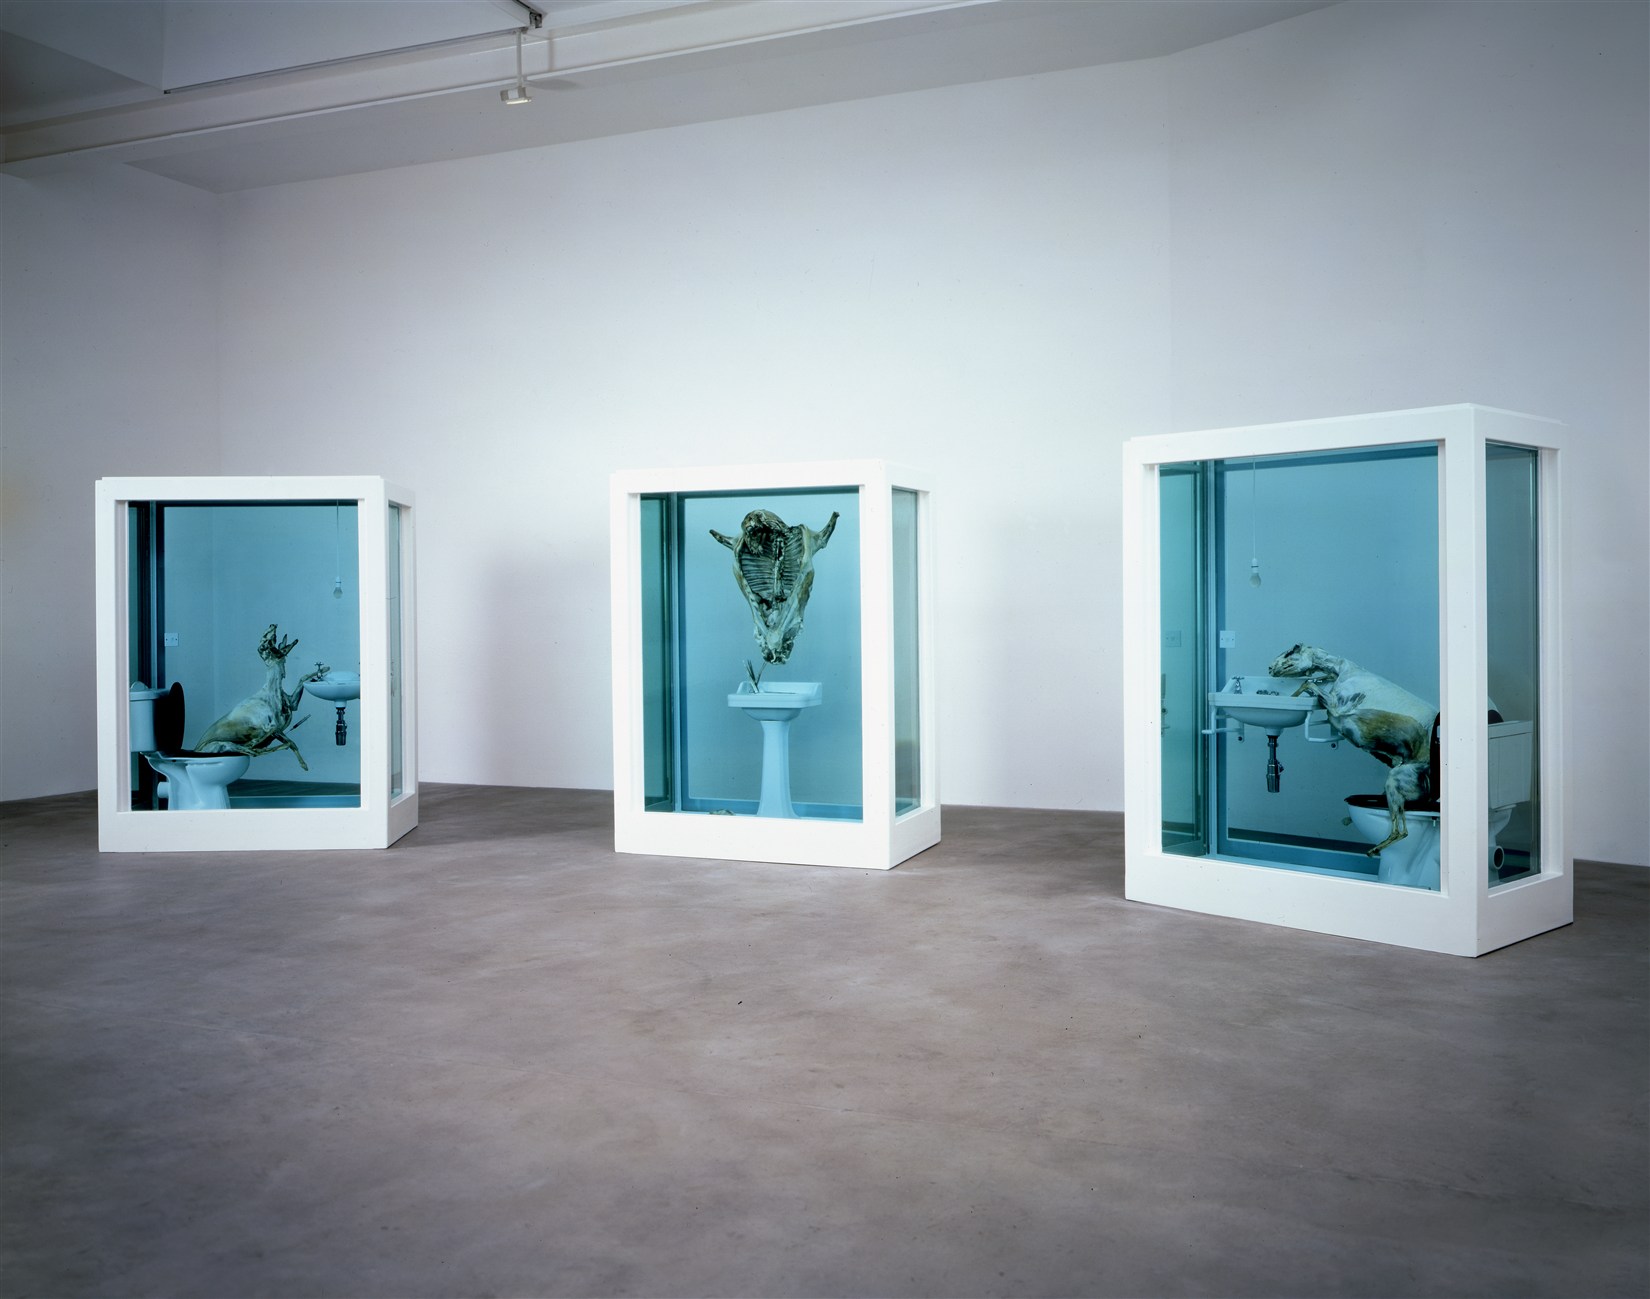 Damien Hirst, The Tranquility of Solitude, 2006. Photograph by Prudence Cuming Associates